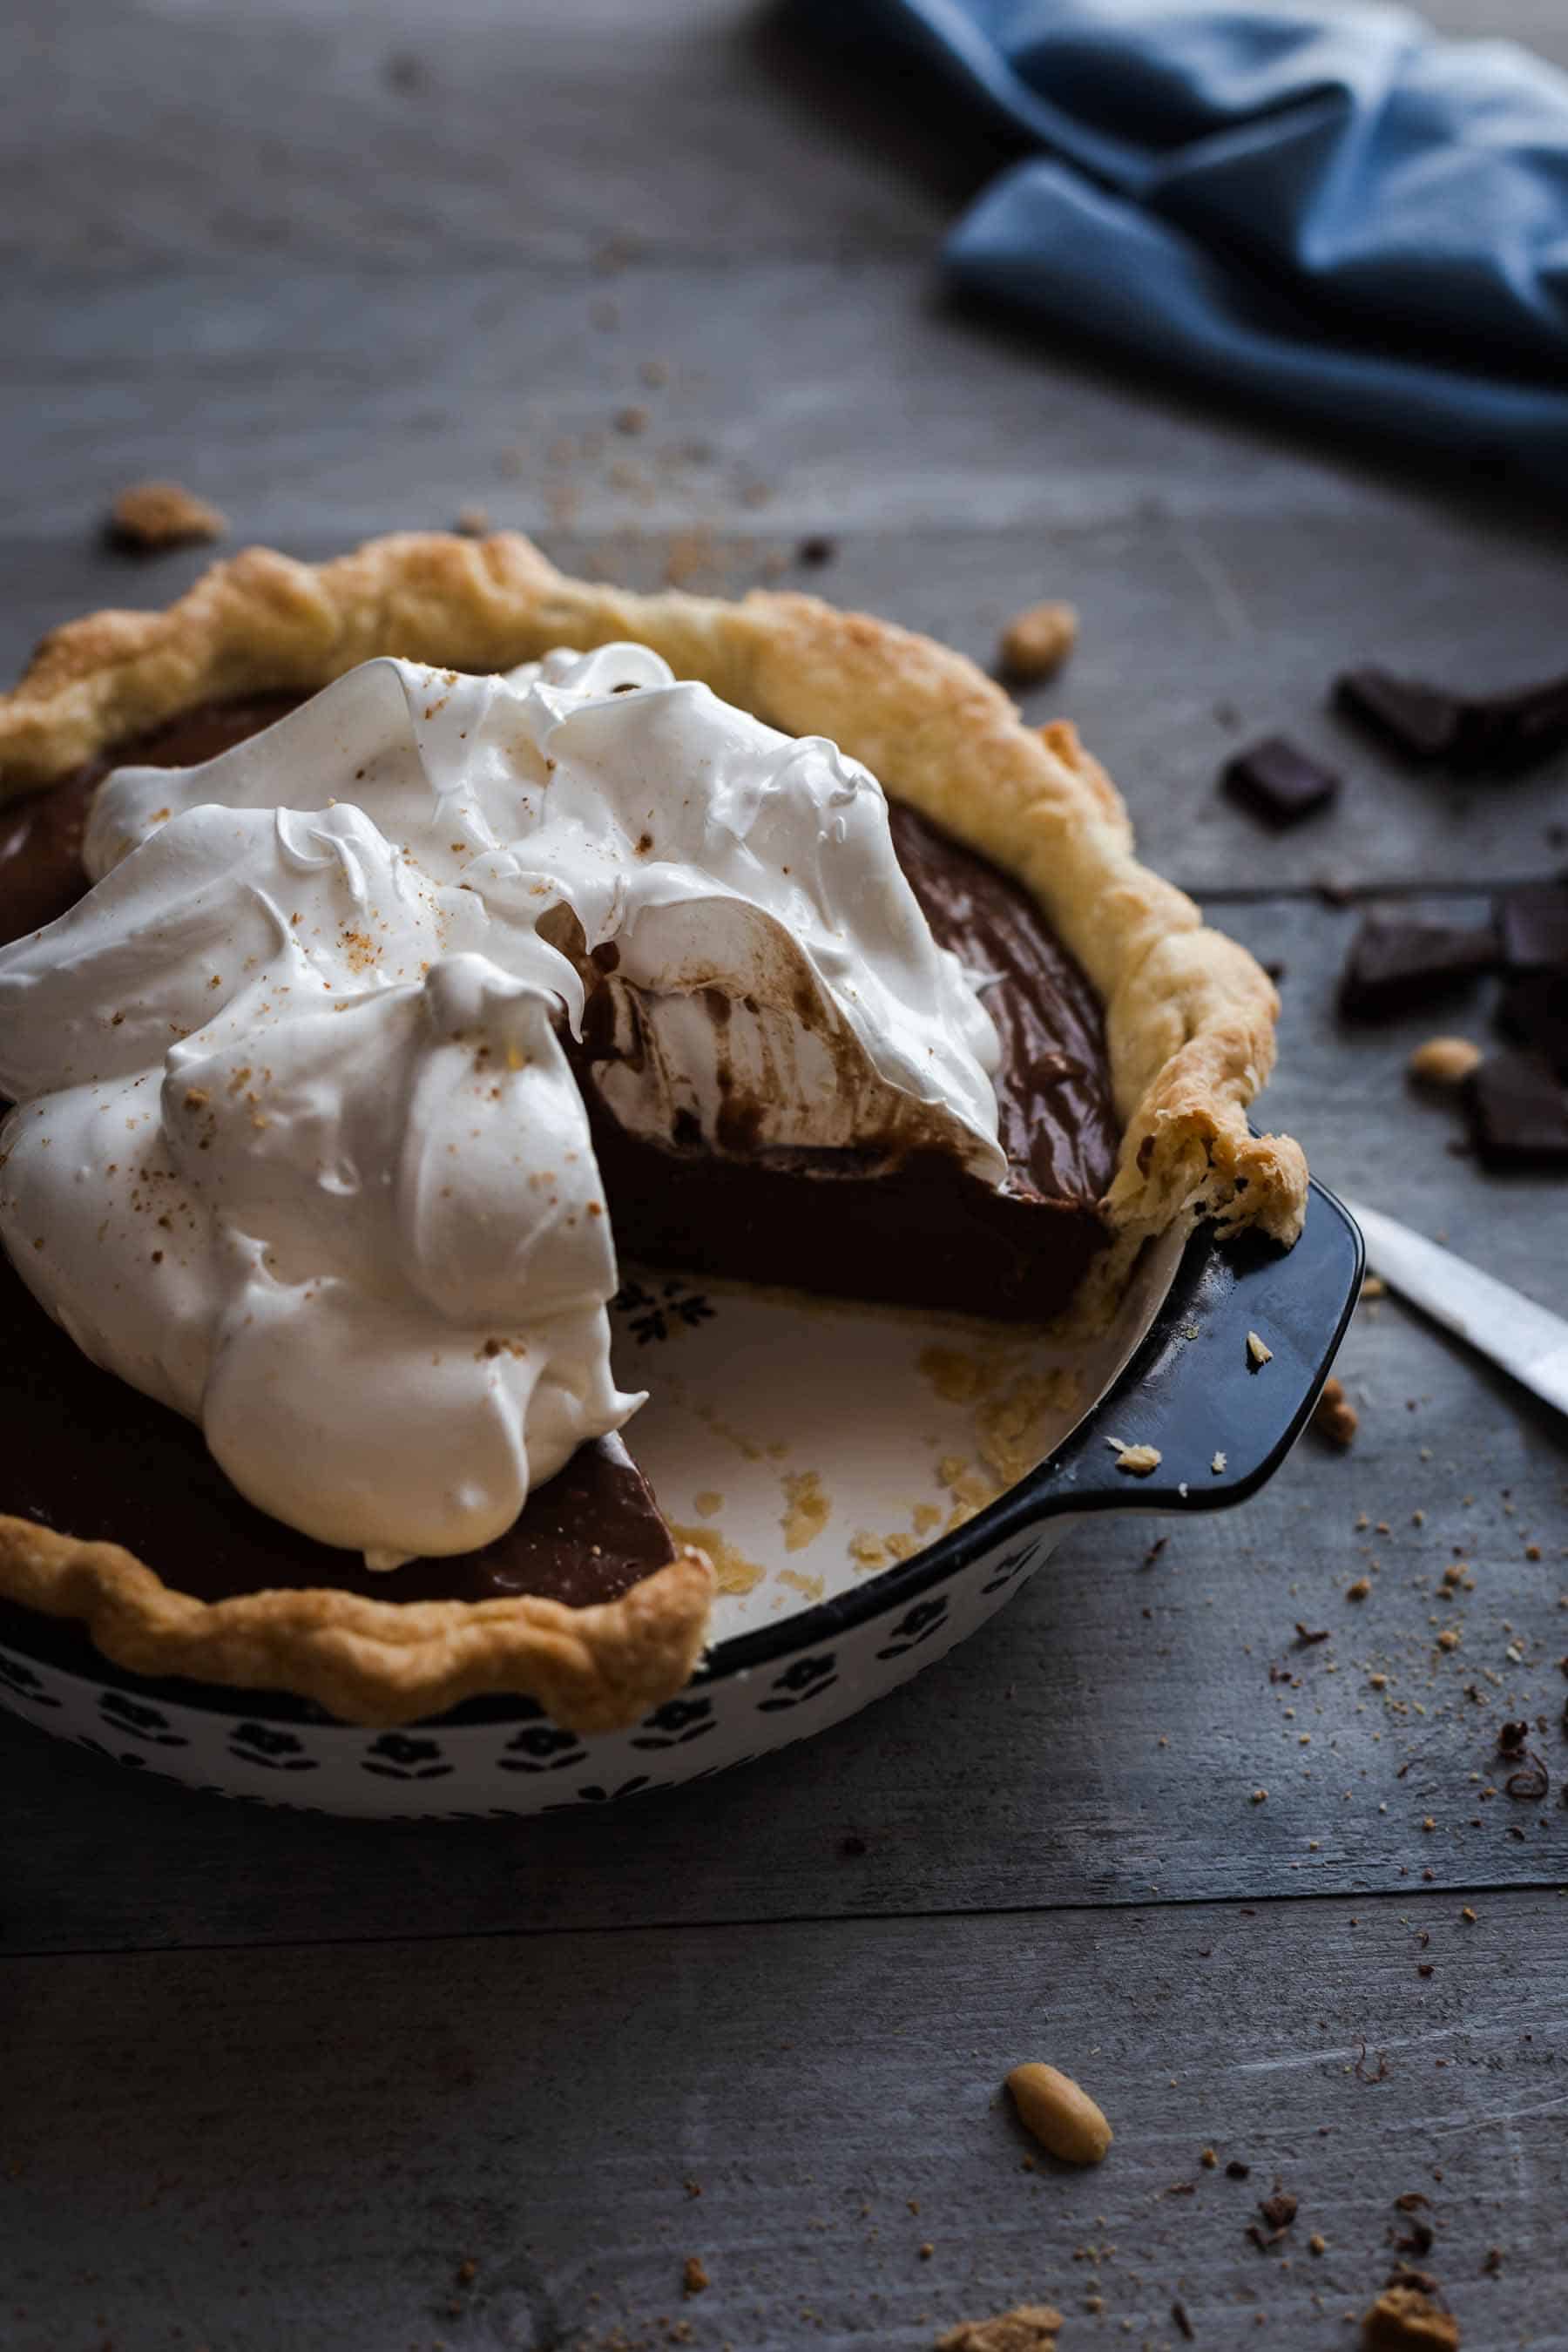 chocolate cream pie topped with meringue and a quarter missing sitting on a wooden table